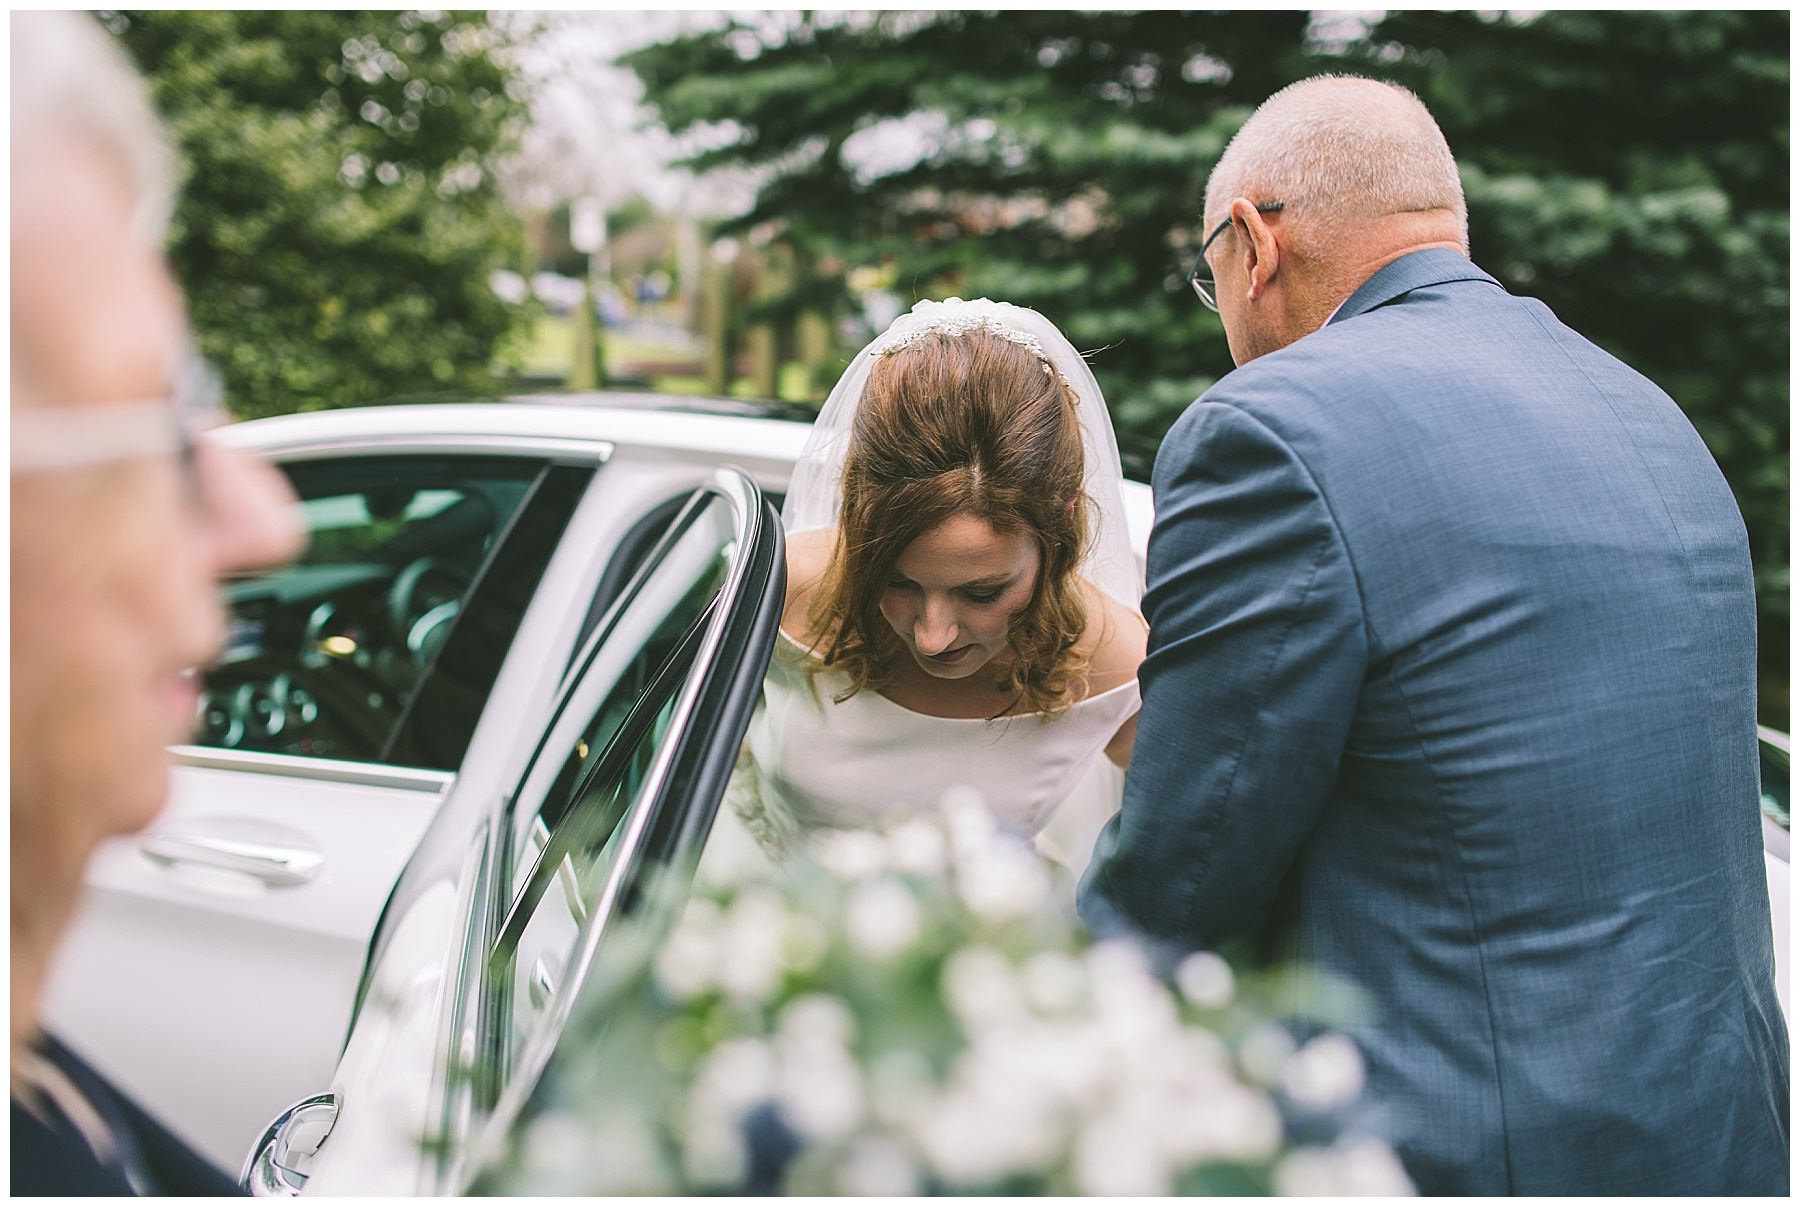 Brides dad helps her out of car as she arrives at church